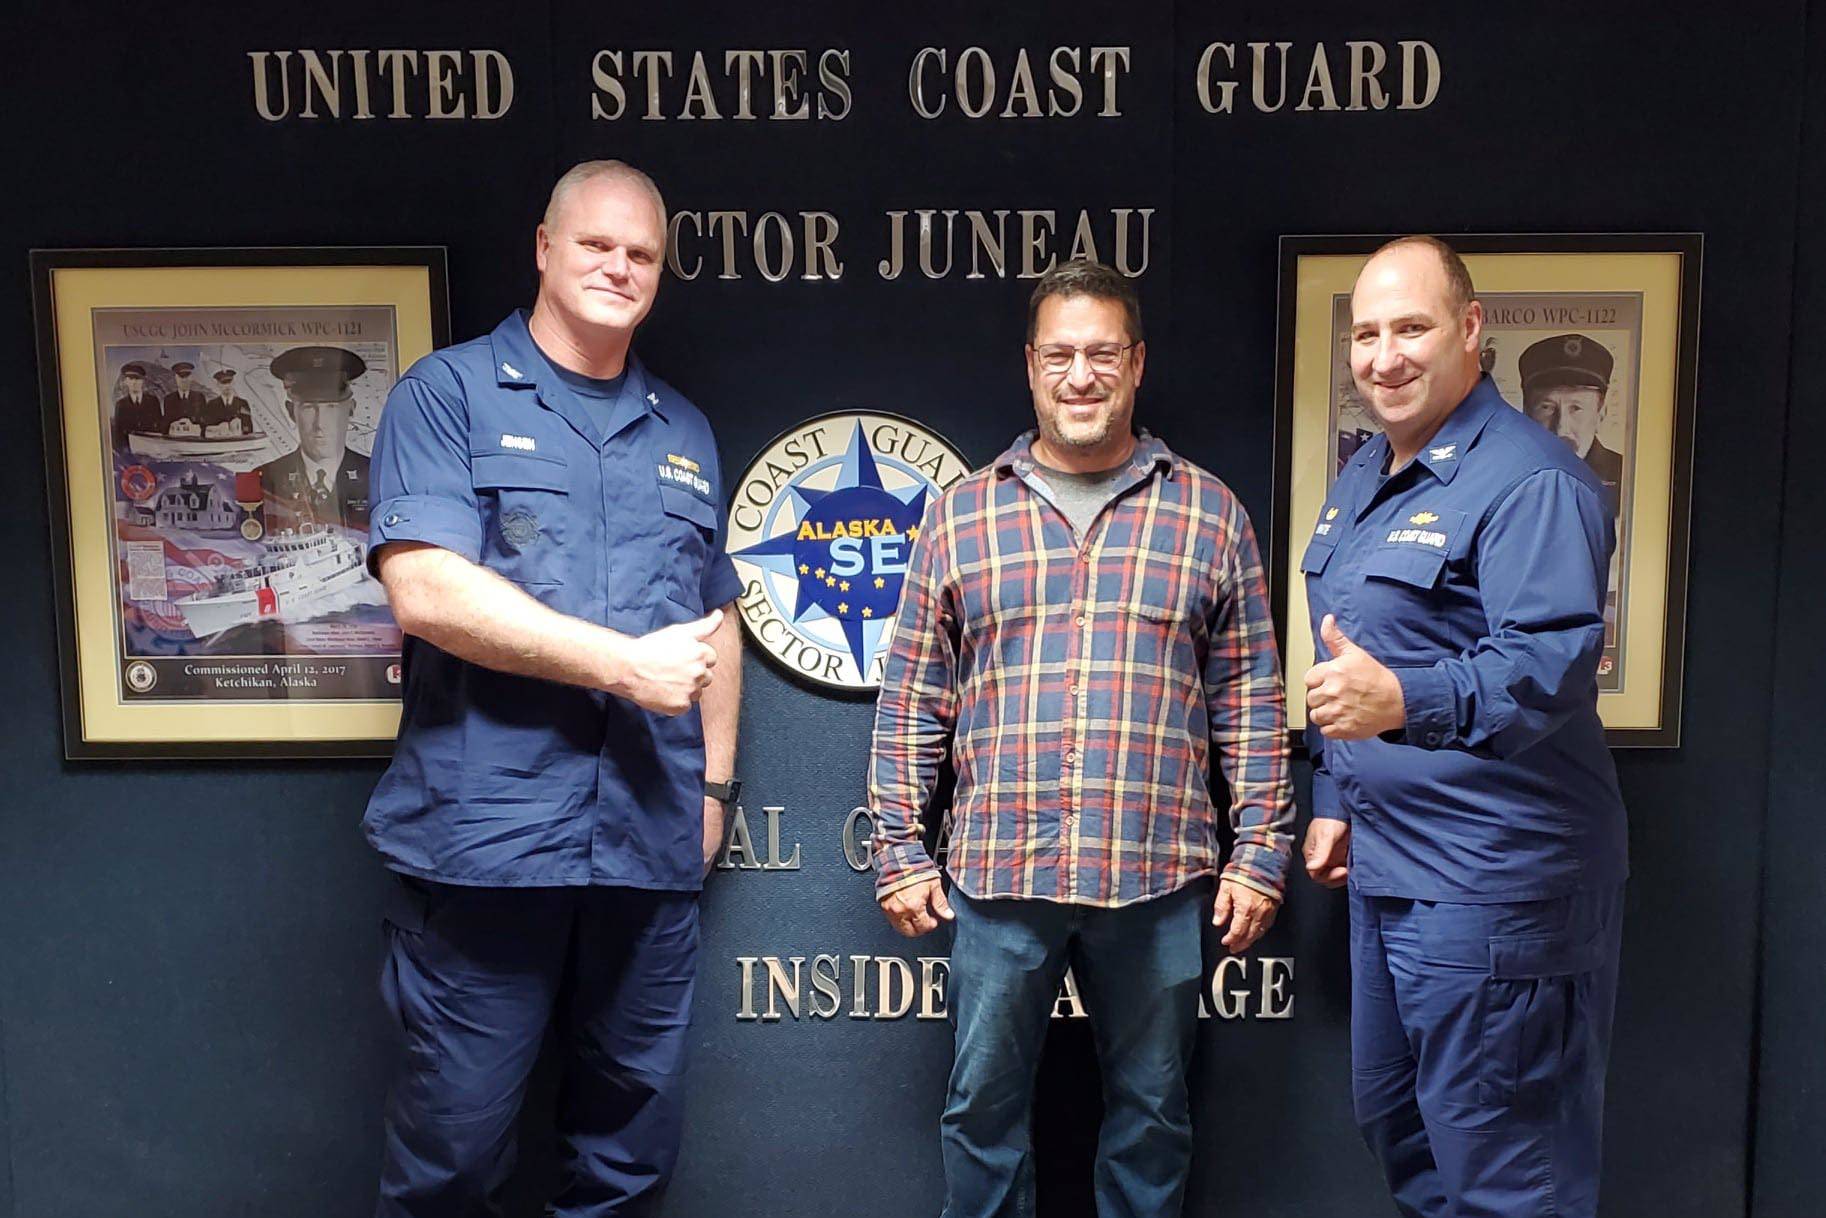 Incoming Coast Guard Sector Juneau commander Capt. Darwin A. Jensen, left, and outgoing commander Capt. Stephen R. White, right, congratulate Herman Cestero, center, for his quick action in rescuing a fisherman in distress on June 24, 2021. (Michael S. Lockett / Juneau Empire)